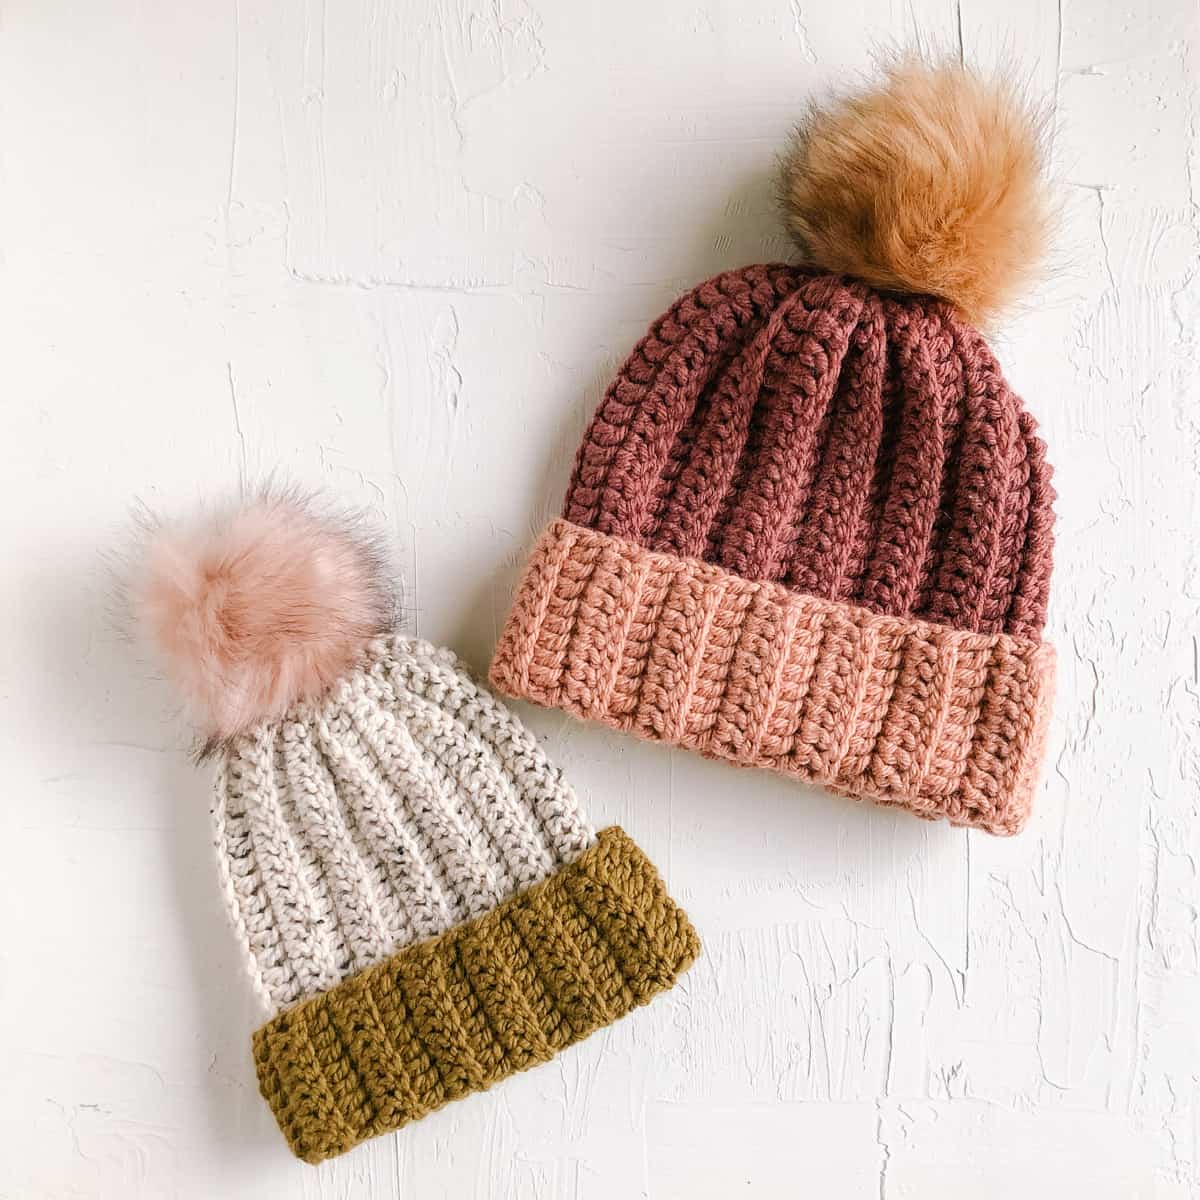 Two simple crochet beanies with faux fur pom poms laying on a white surface.